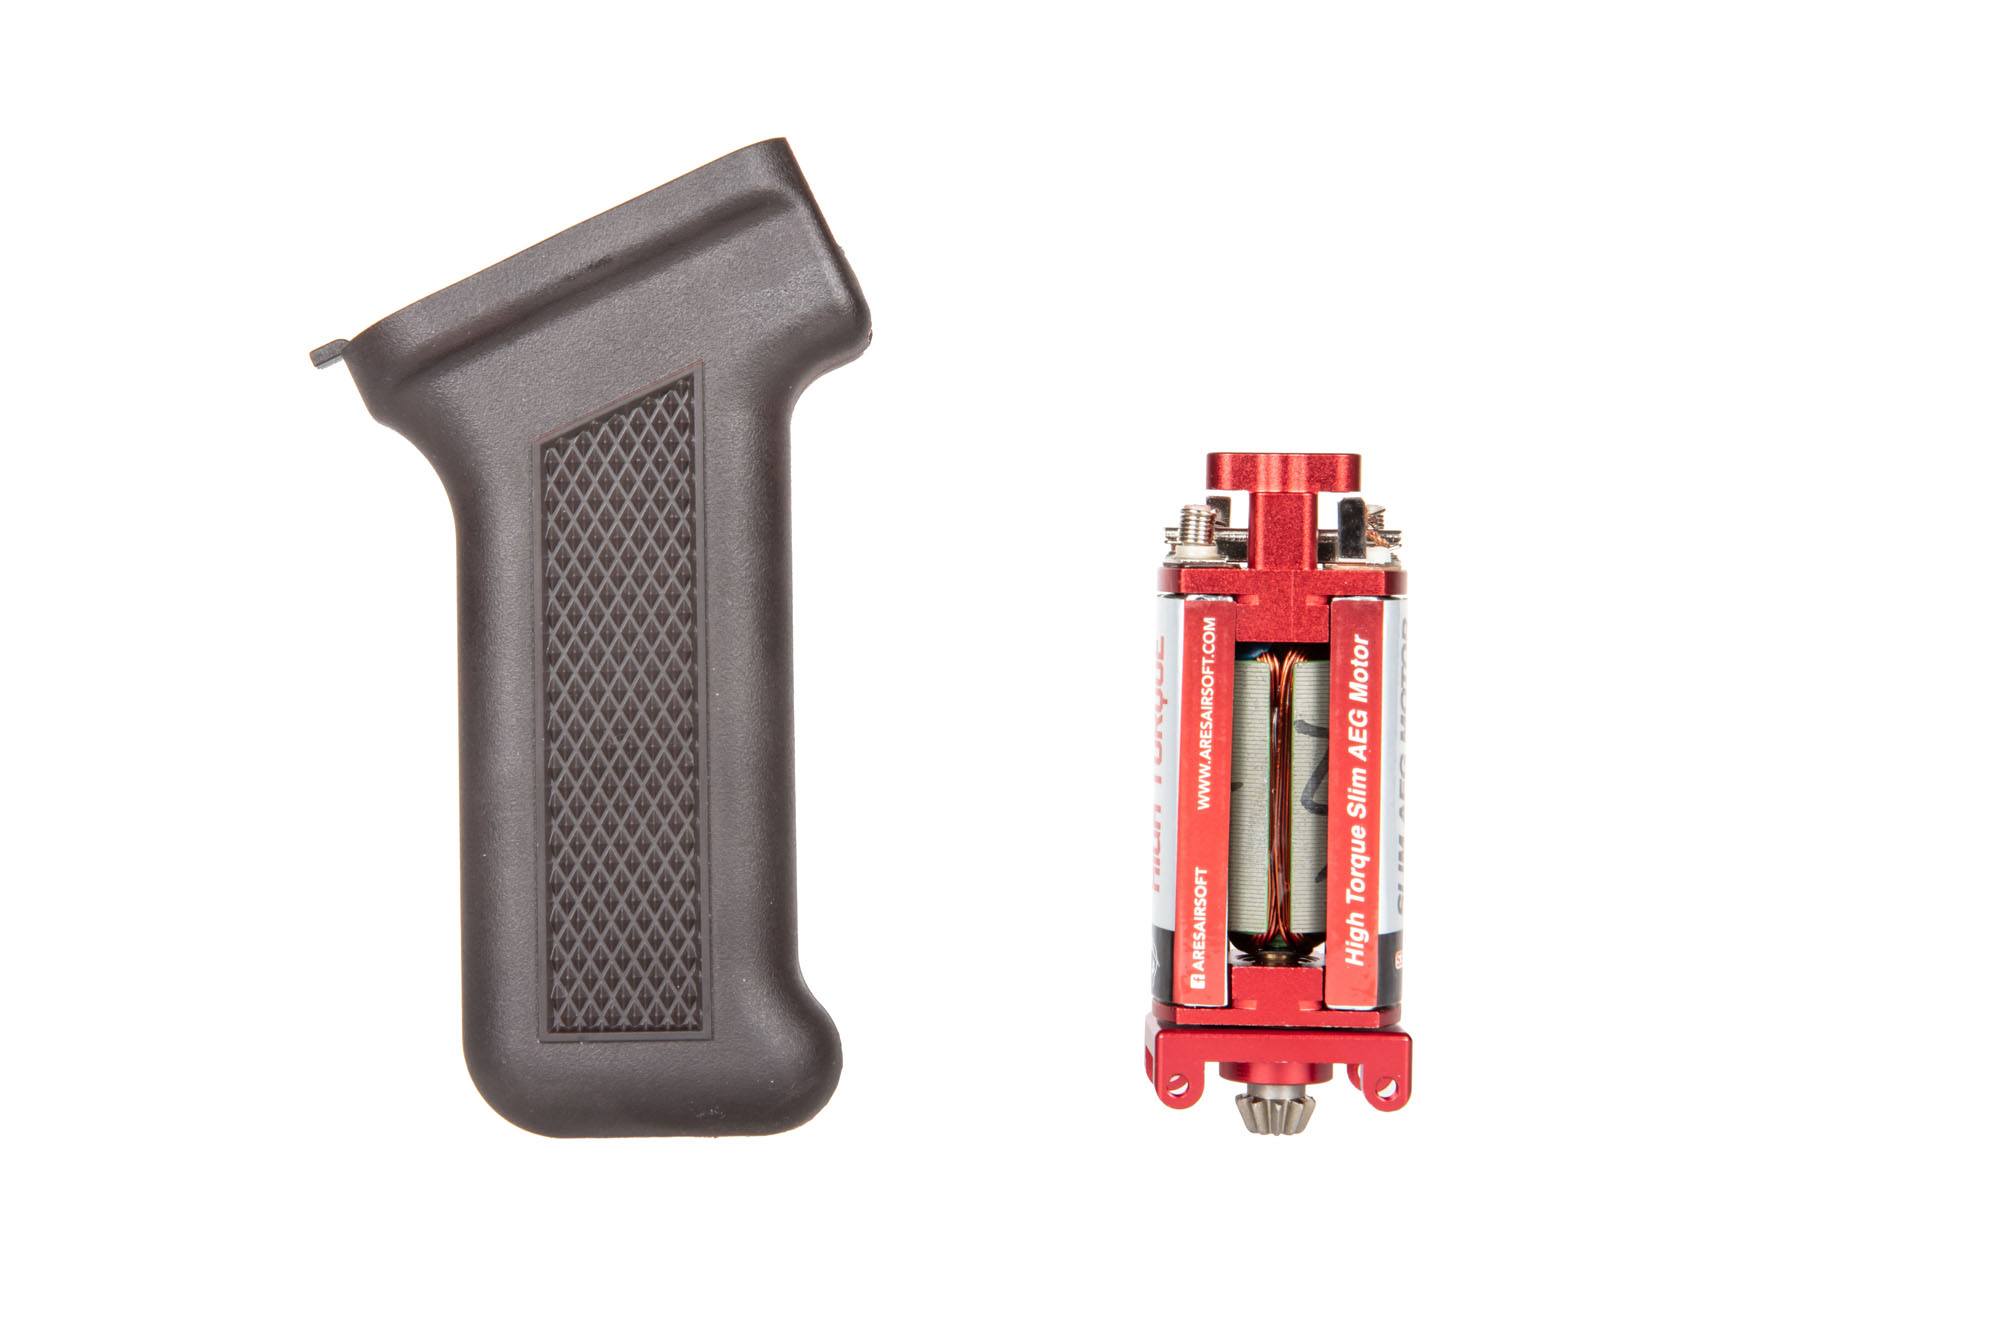 HT SLIM motor and grip set for AK